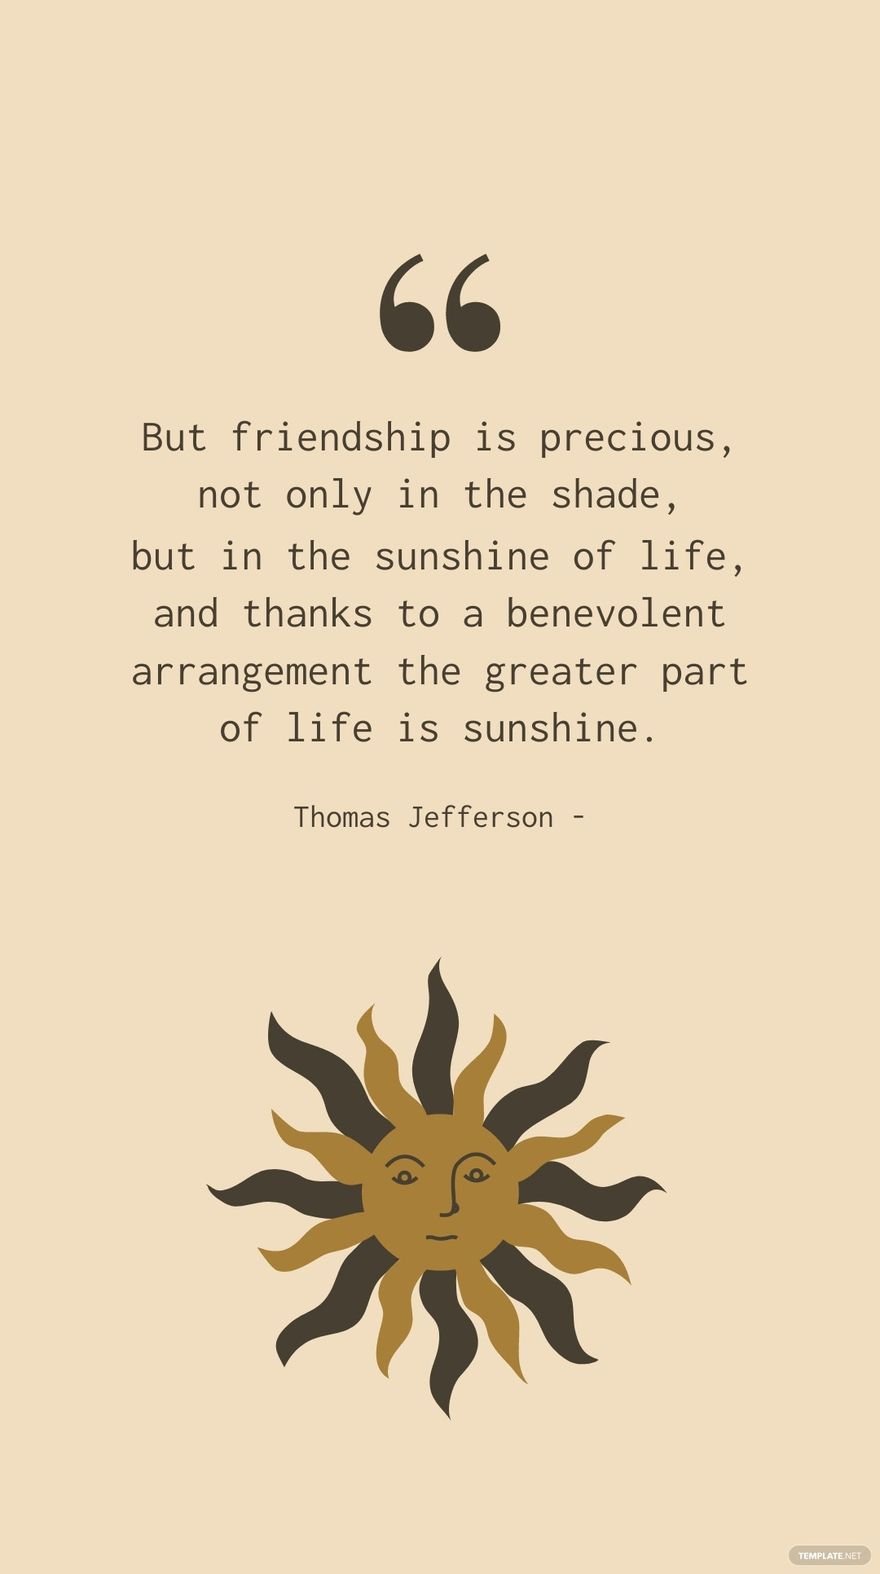 Thomas Jefferson - But friendship is precious, not only in the shade, but in the sunshine of life, and thanks to a benevolent arrangement the greater part of life is sunshine.